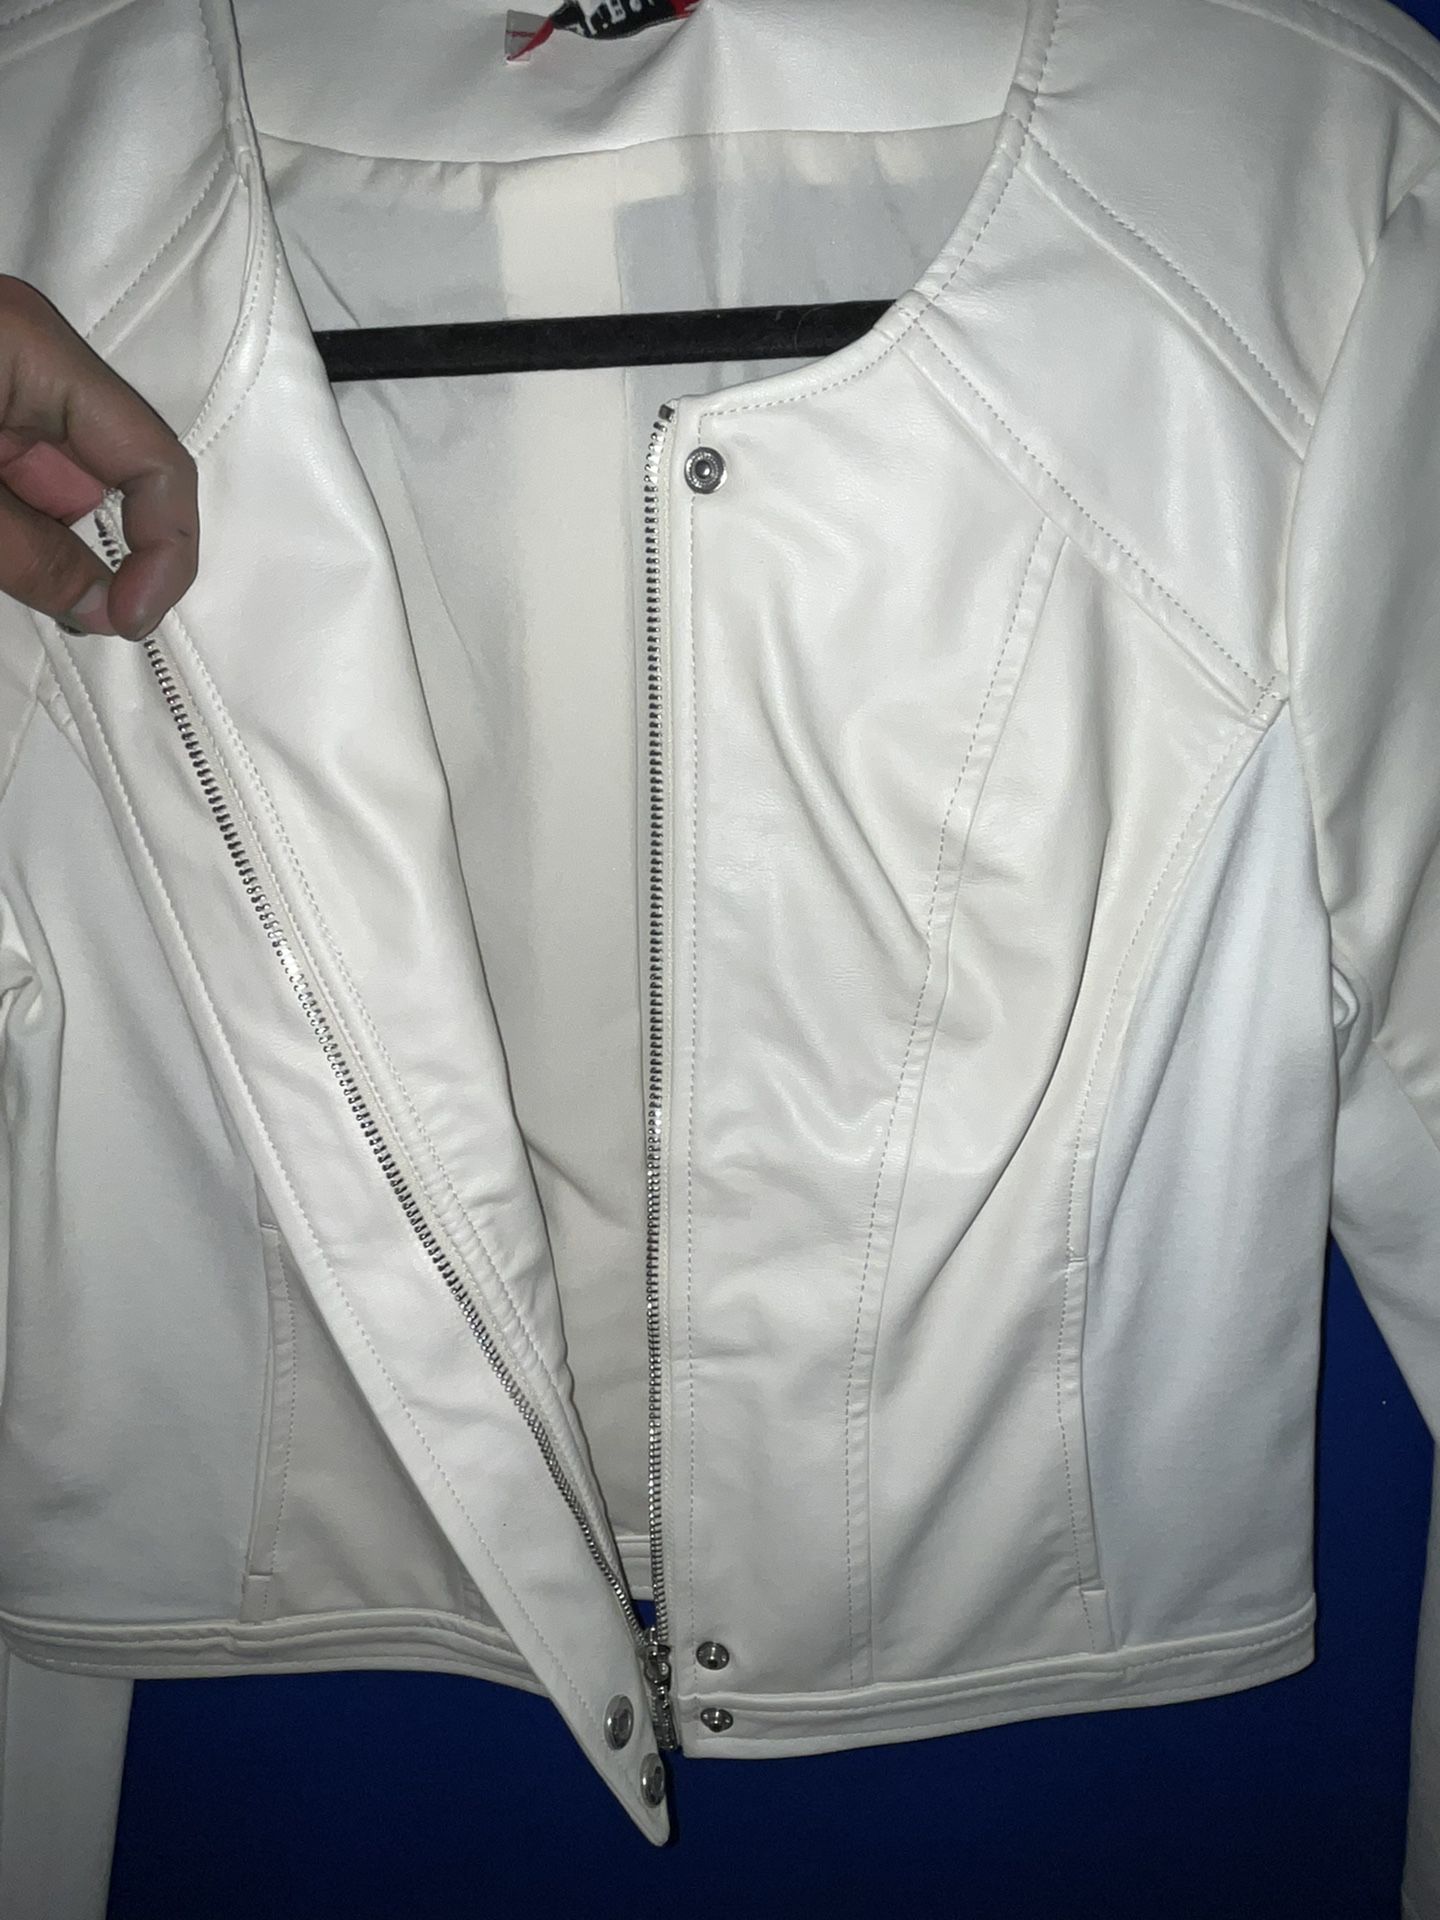 Women’s Guess (off white) Leather Jacket Zip Up Button Up Size Medium BNWT 